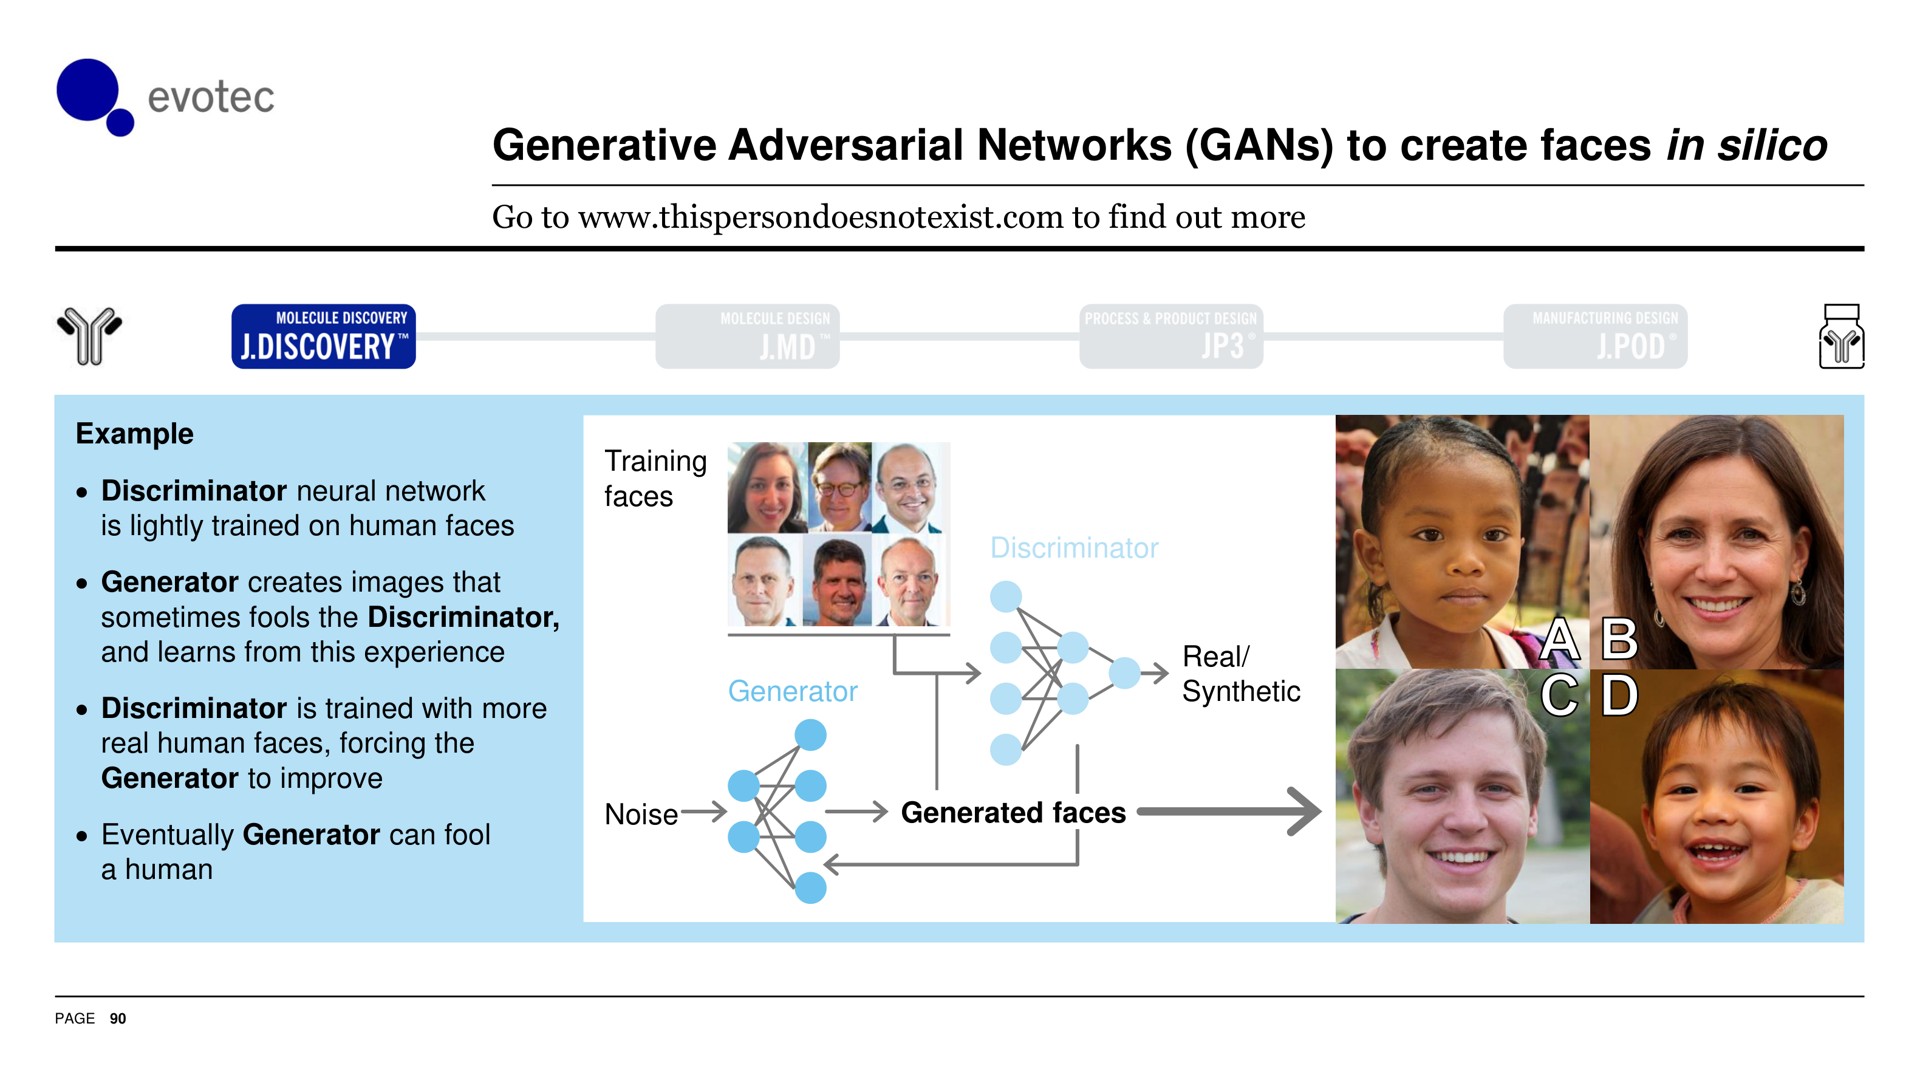 generative networks to create faces in silico | Evotec